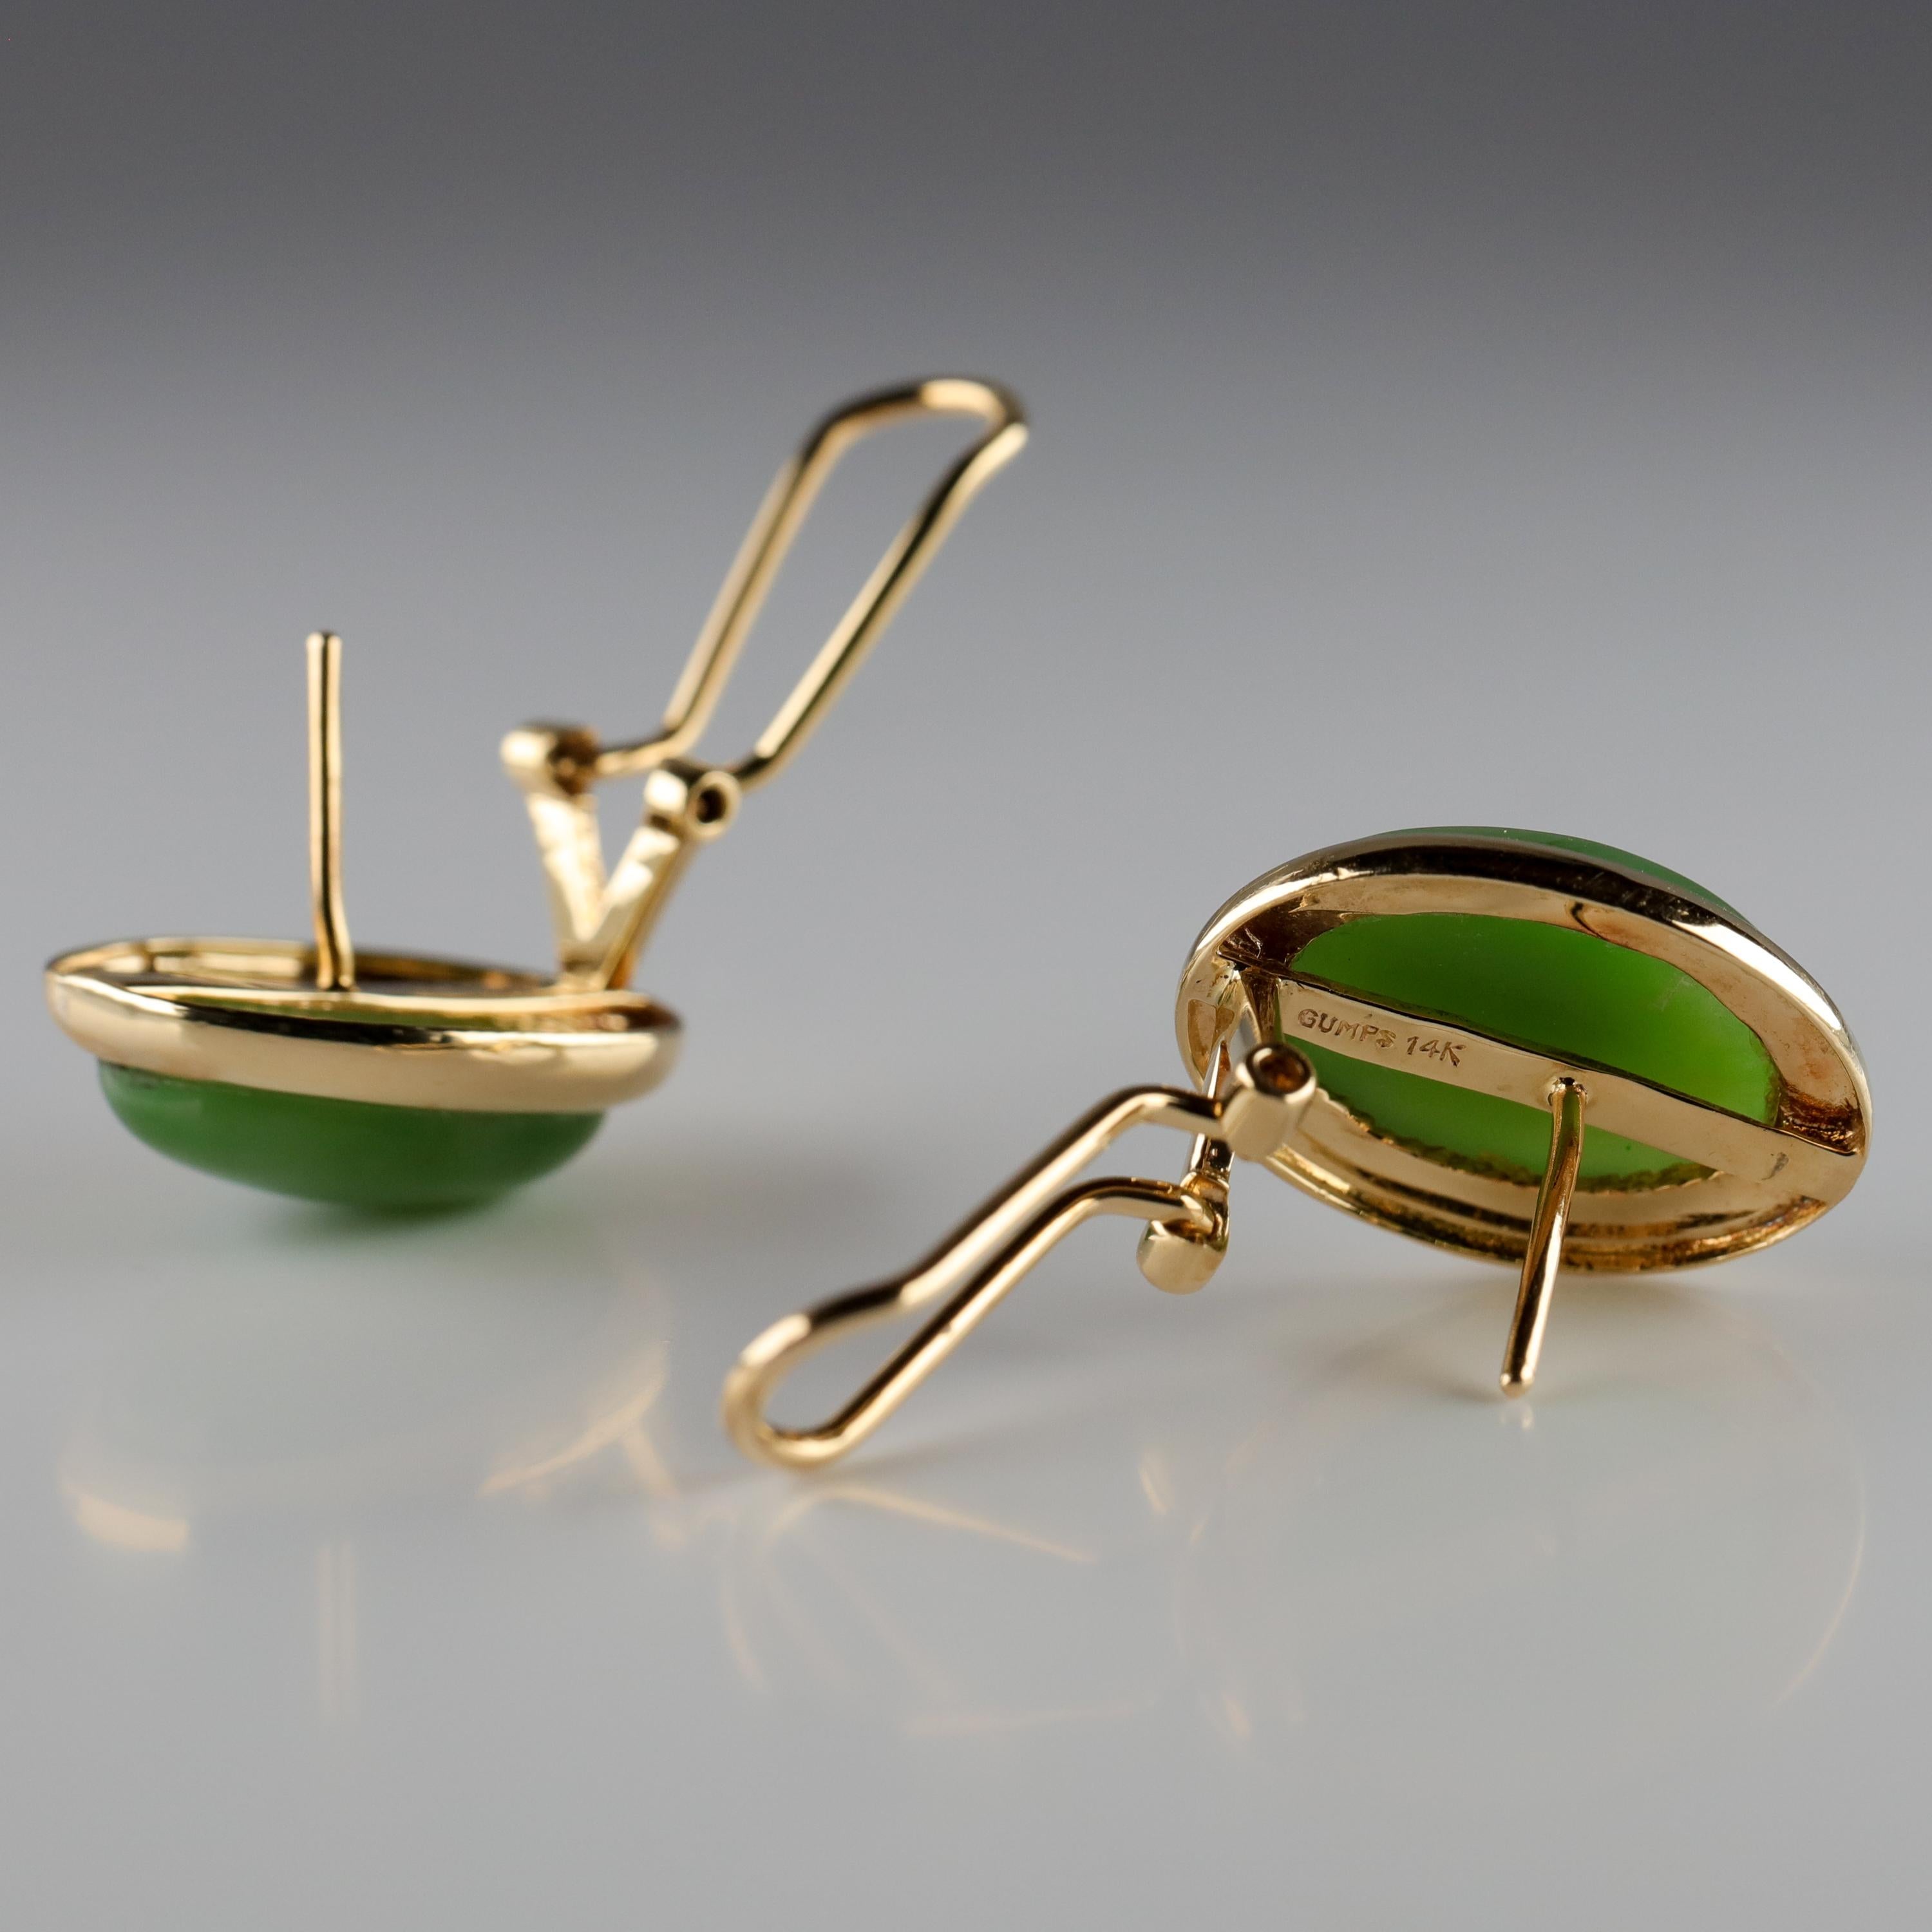 Cabochon Gump's Jade Earrings in Gold, circa 1990s